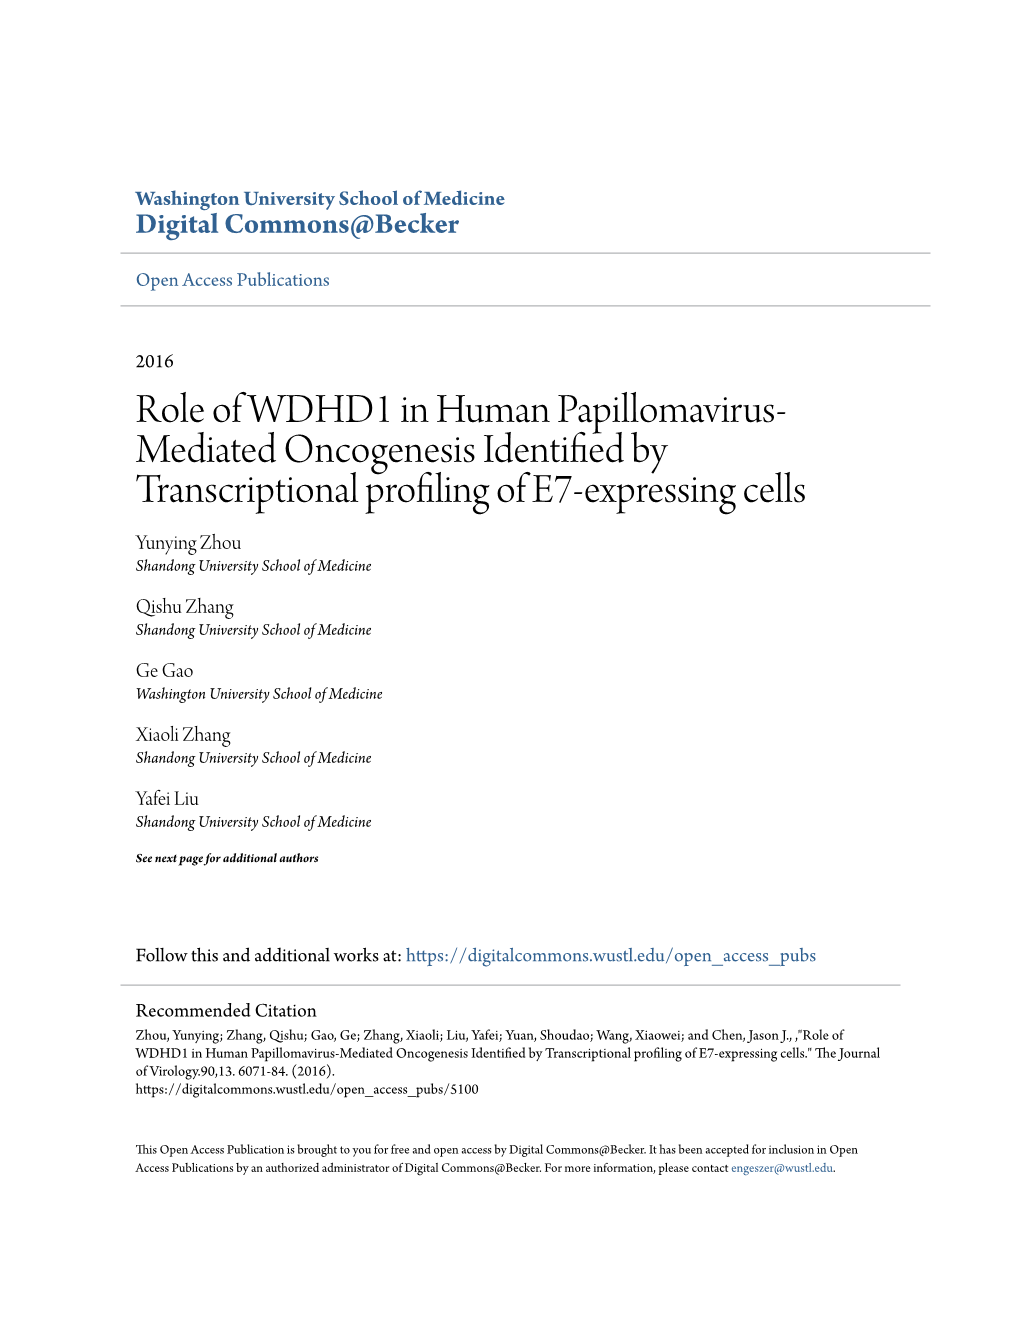 Role of WDHD1 in Human Papillomavirus-Mediated Oncogenesis Identified by Transcriptional Profiling of E7-Expressing Cells." the Ourj Nal of Virology.90,13